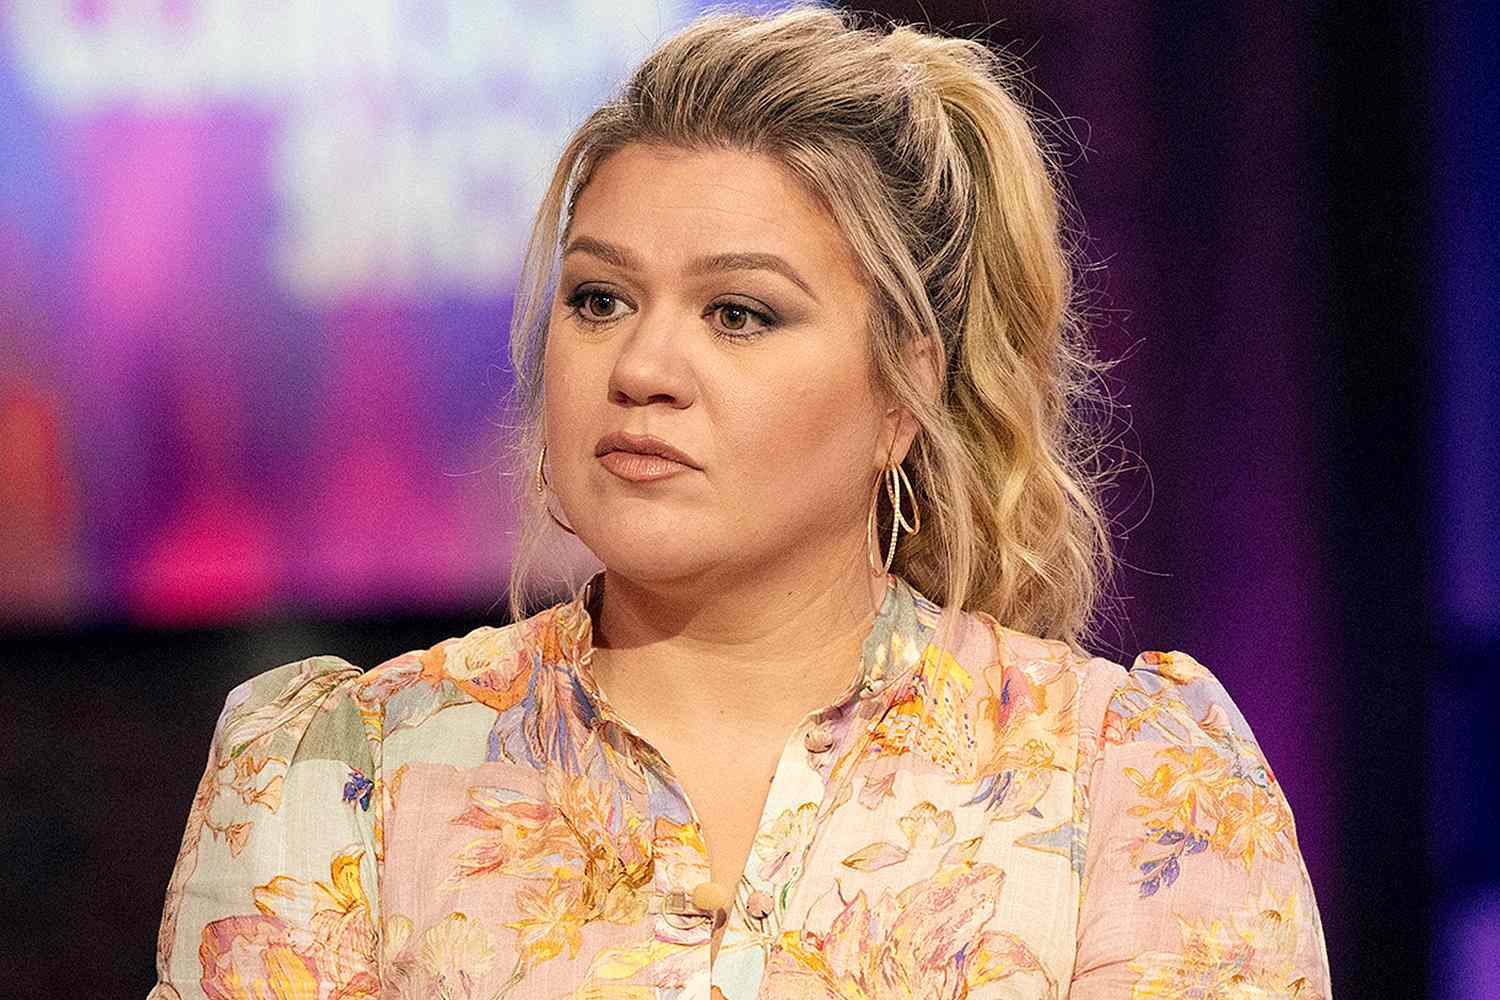 Kelly Clarkson wearing a floral dress on The Kelly Clarkson Show